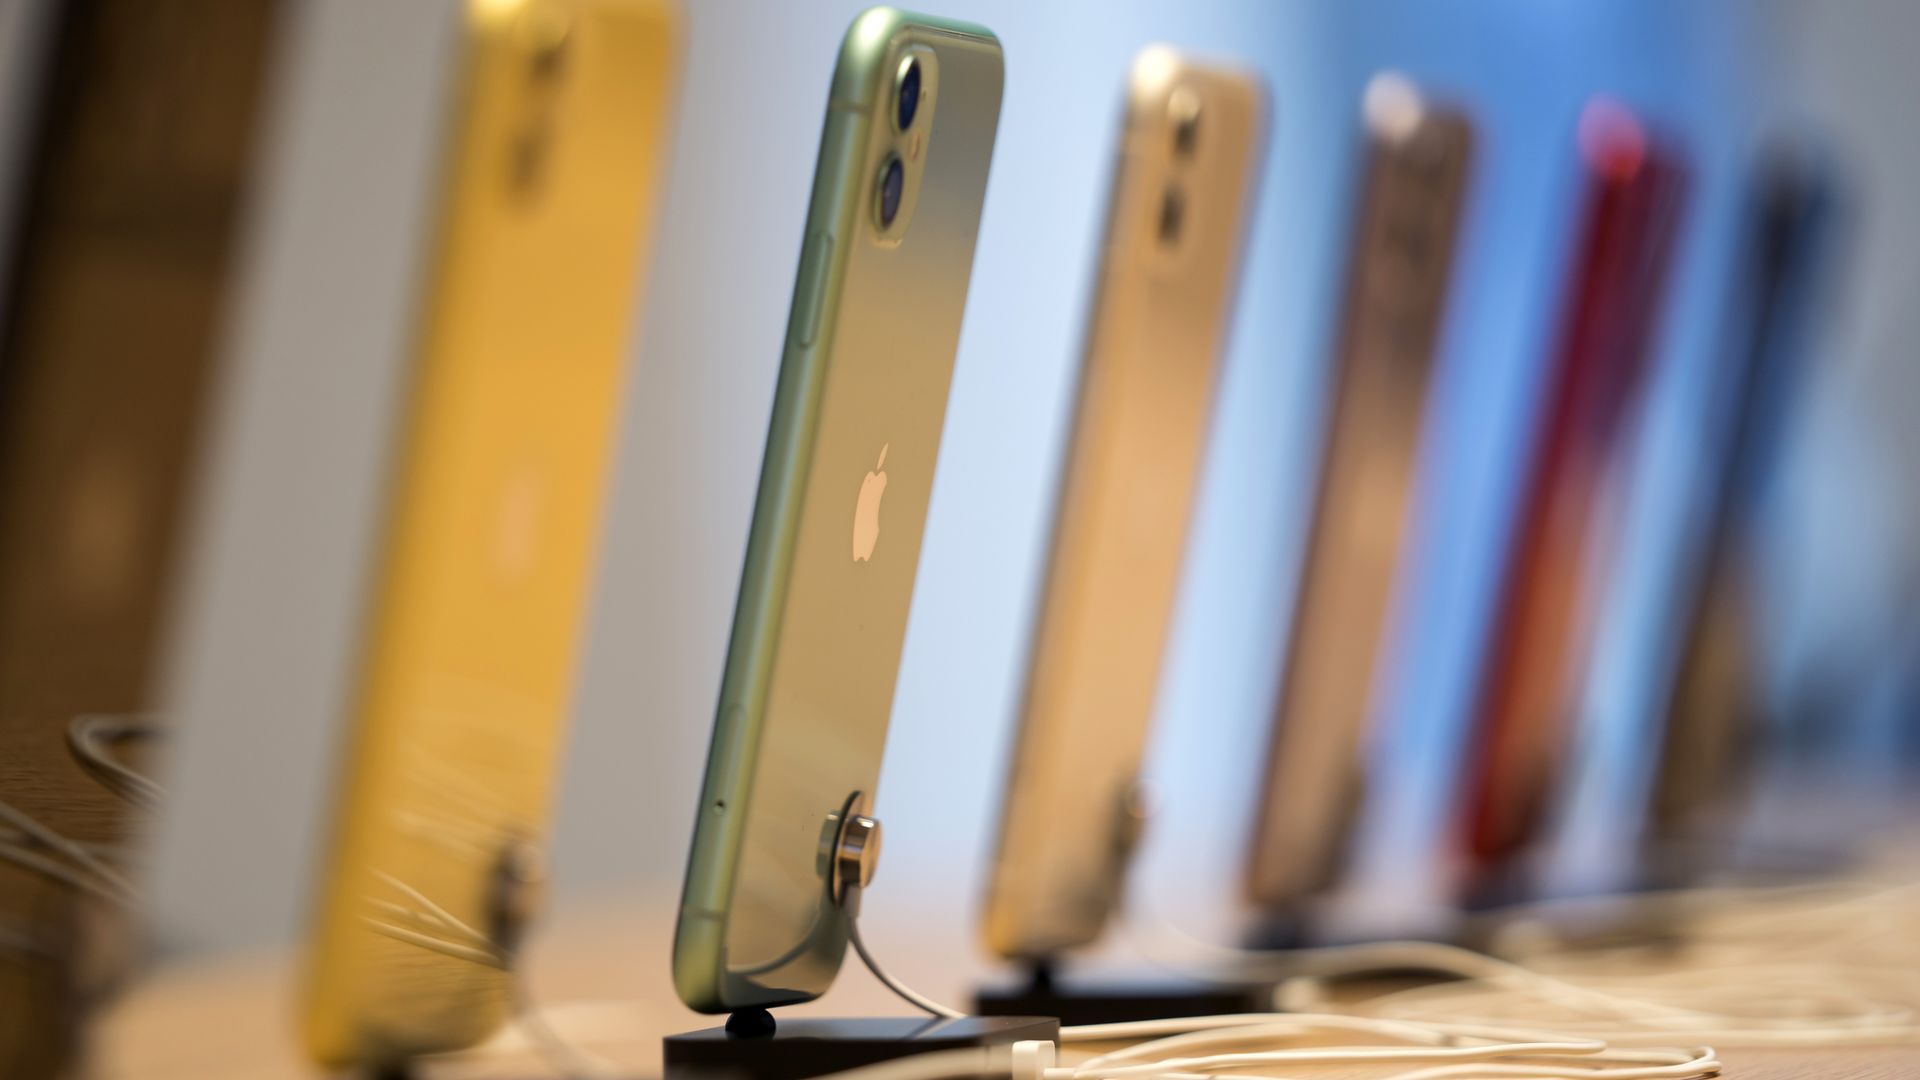 Photo of row of iPhone backs at a store display